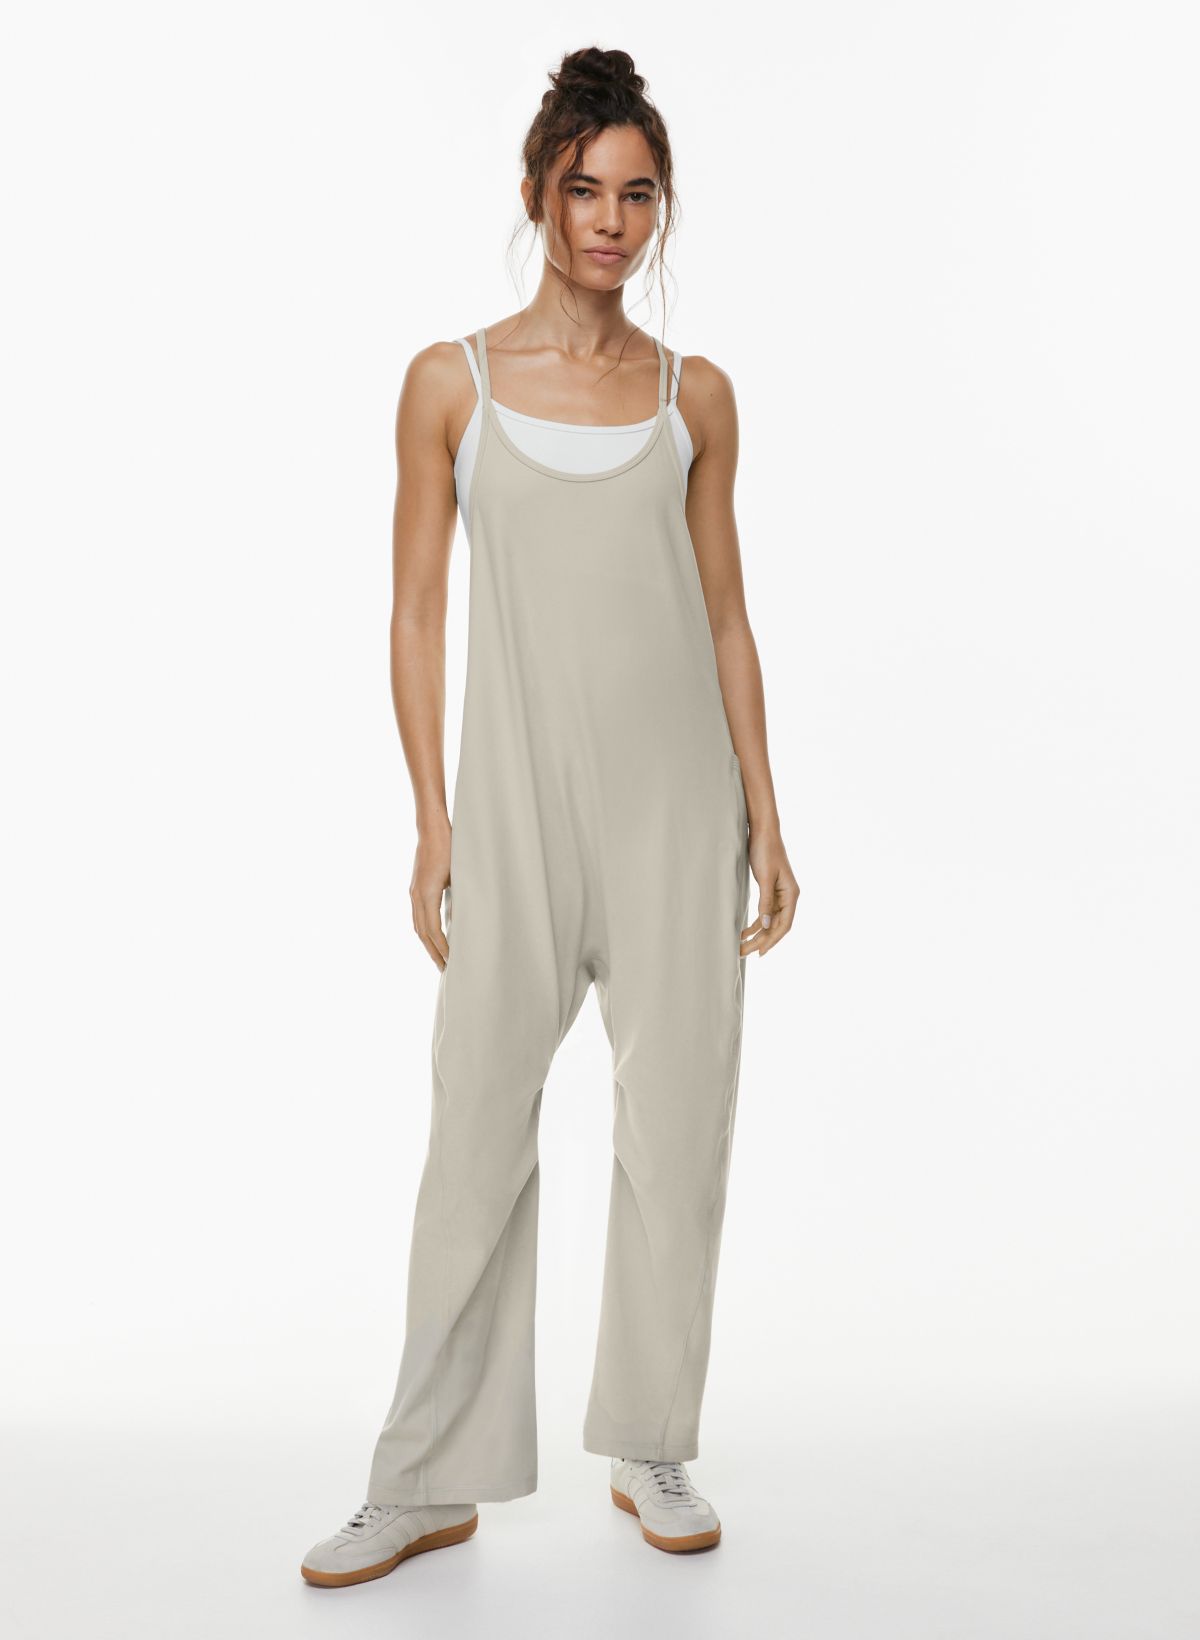 Women's Slim Fit Tight Jumpsuit with Seamless Design Perfect for Any  Occasion